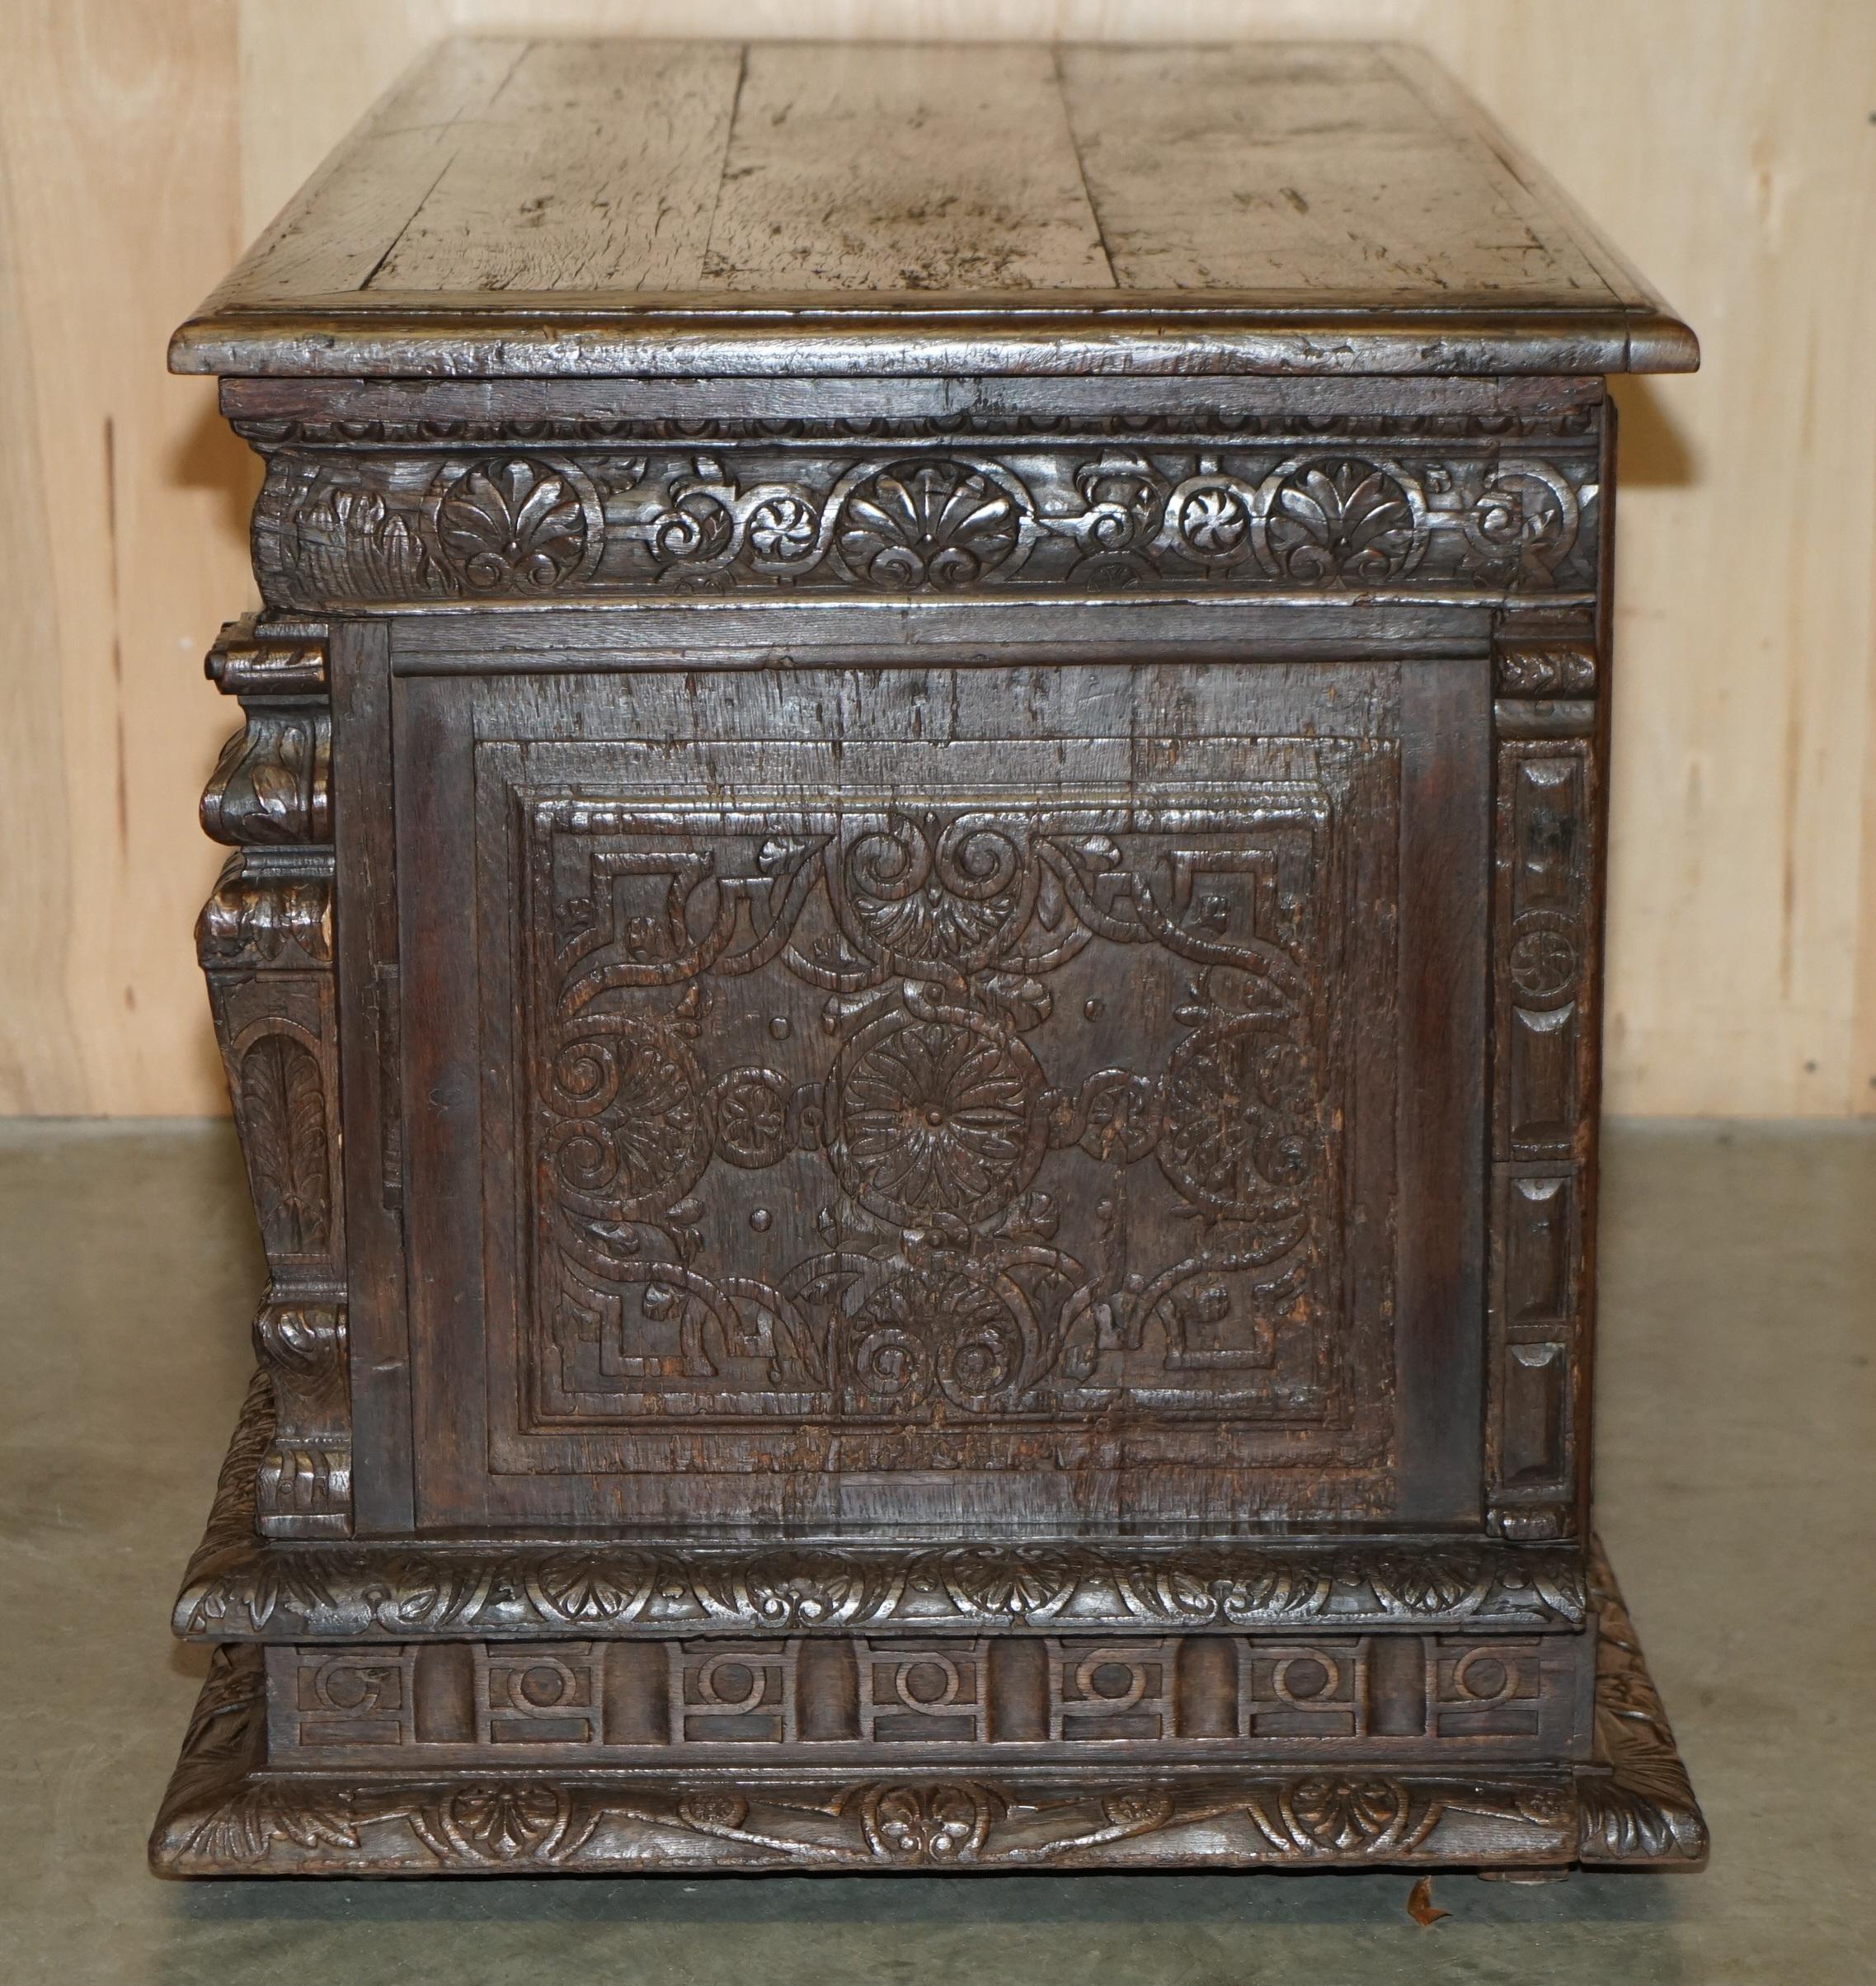 16TH CENTURY MUSEUM QUALity EXHiBITION HAND CARved ITALIAN CASSONE DESK TABLE im Angebot 2